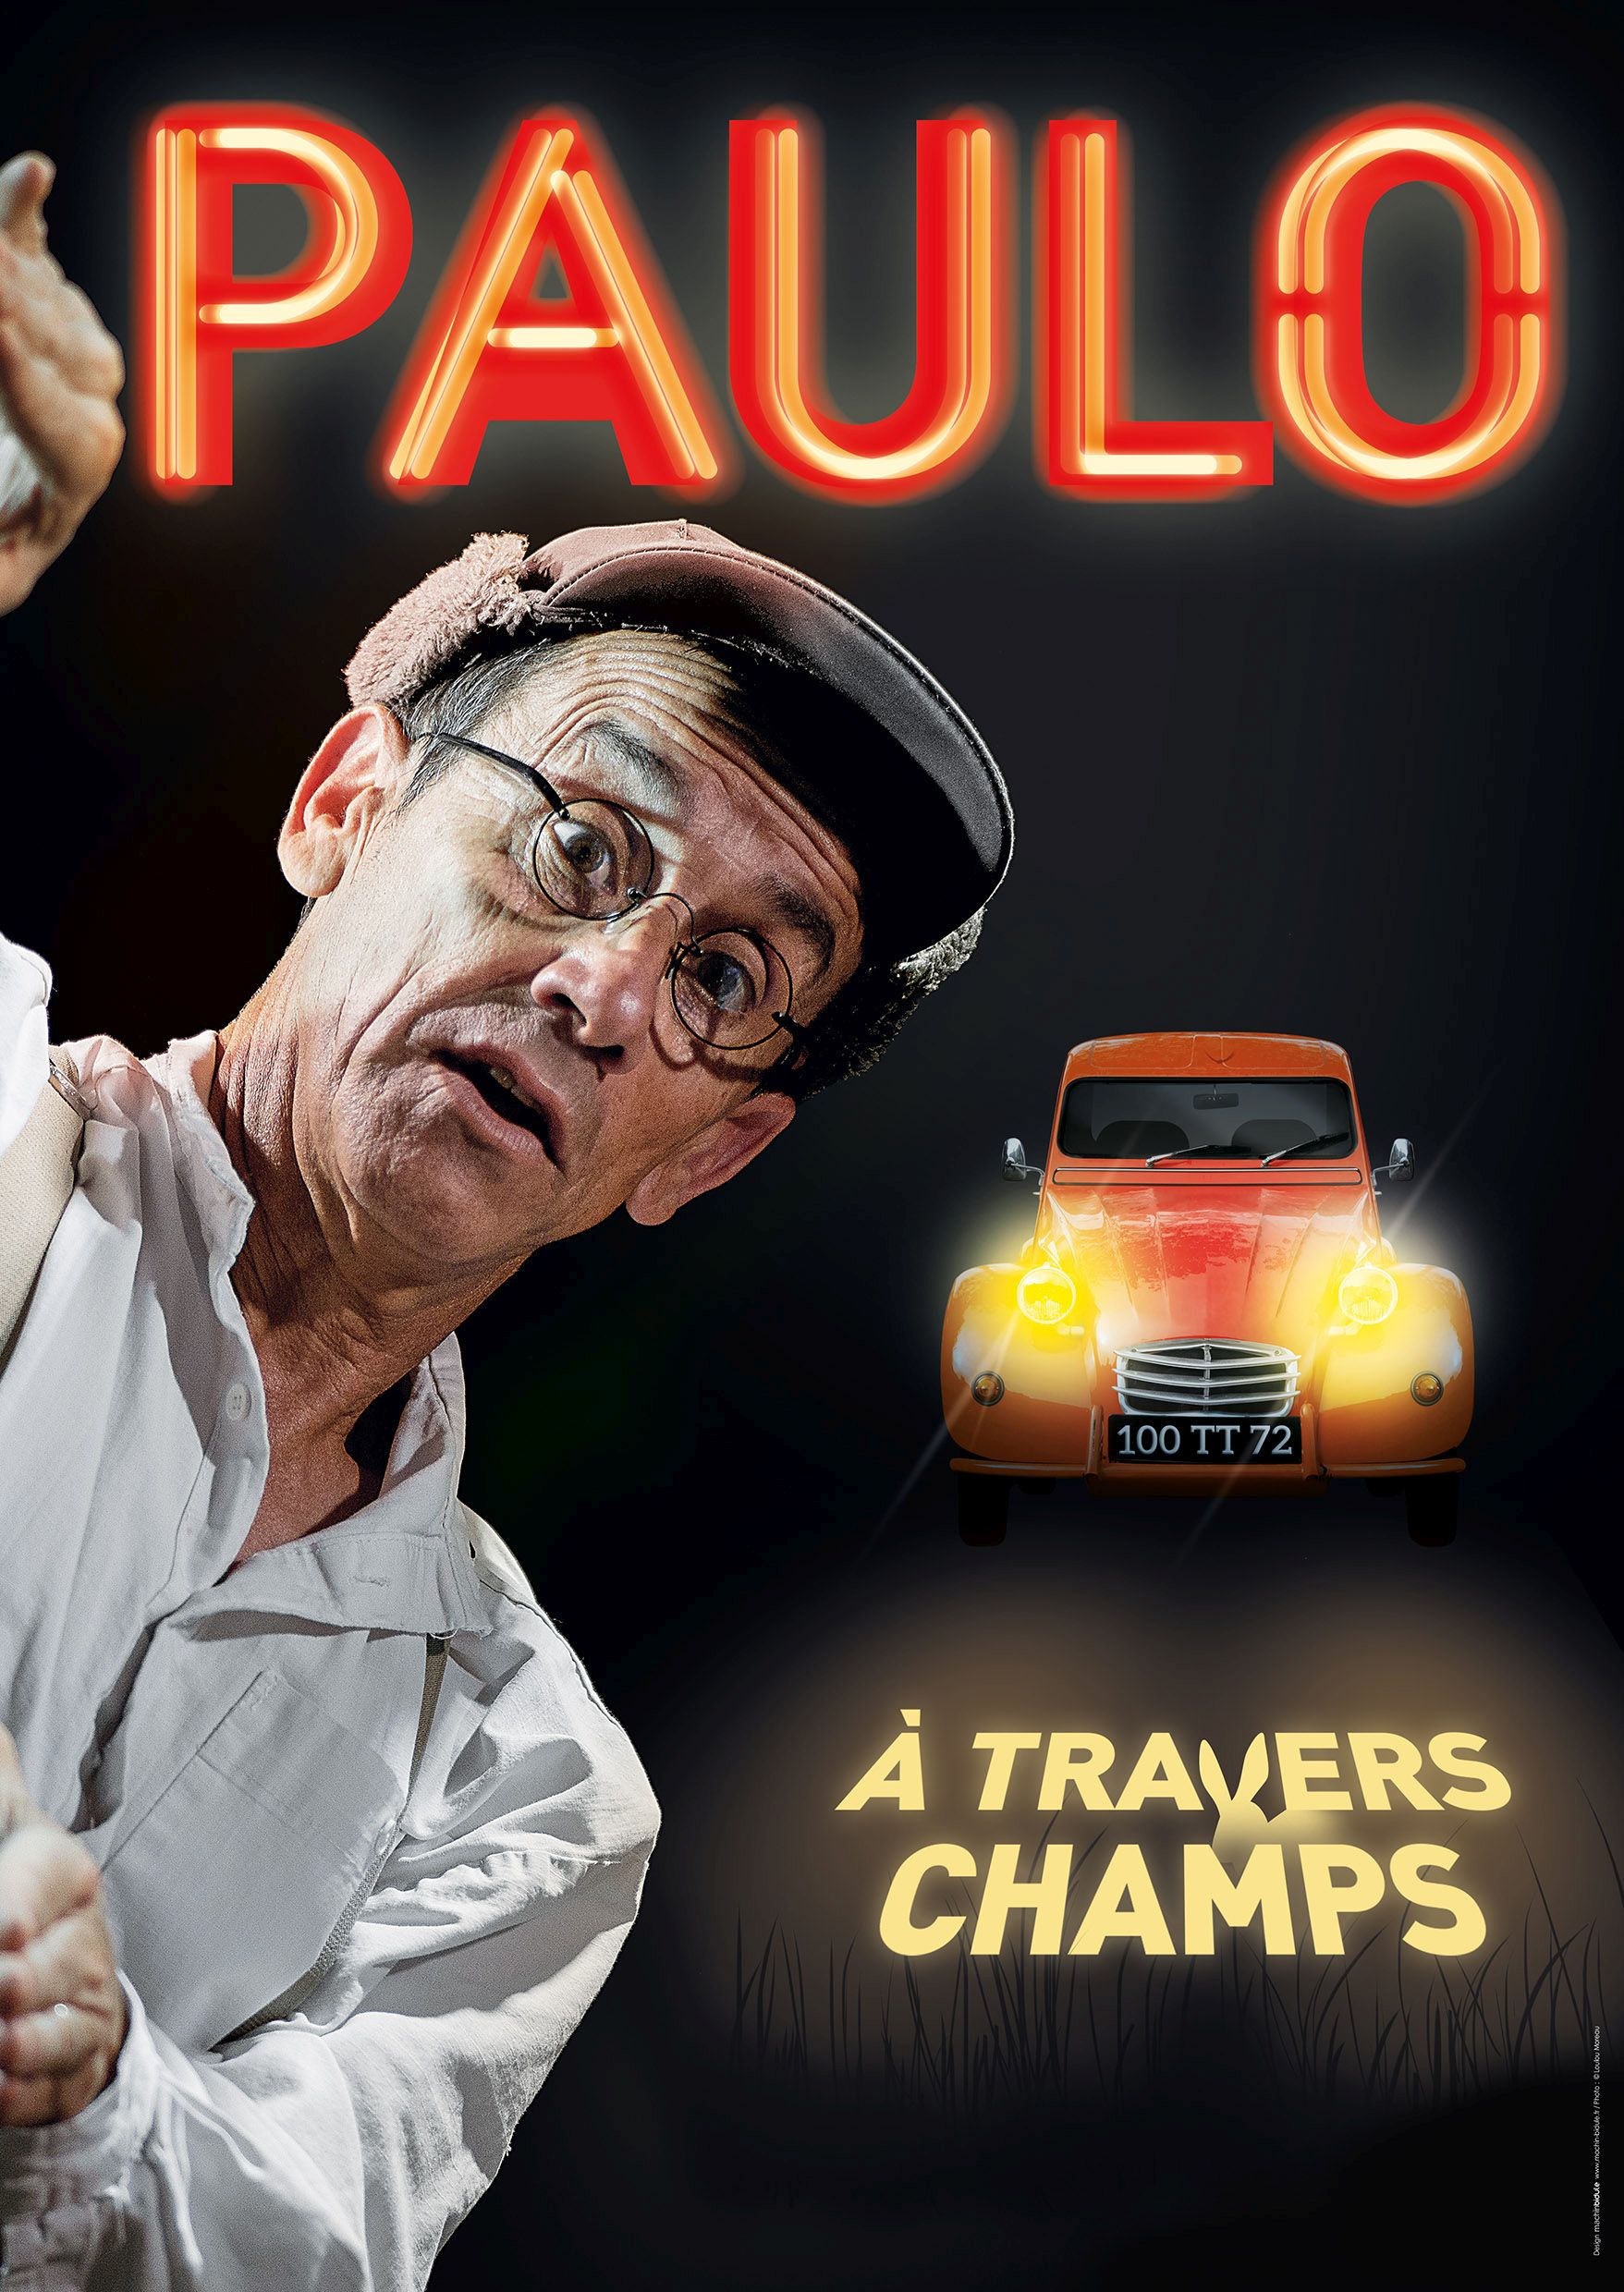 PAULO " A travers champs" COMPLET